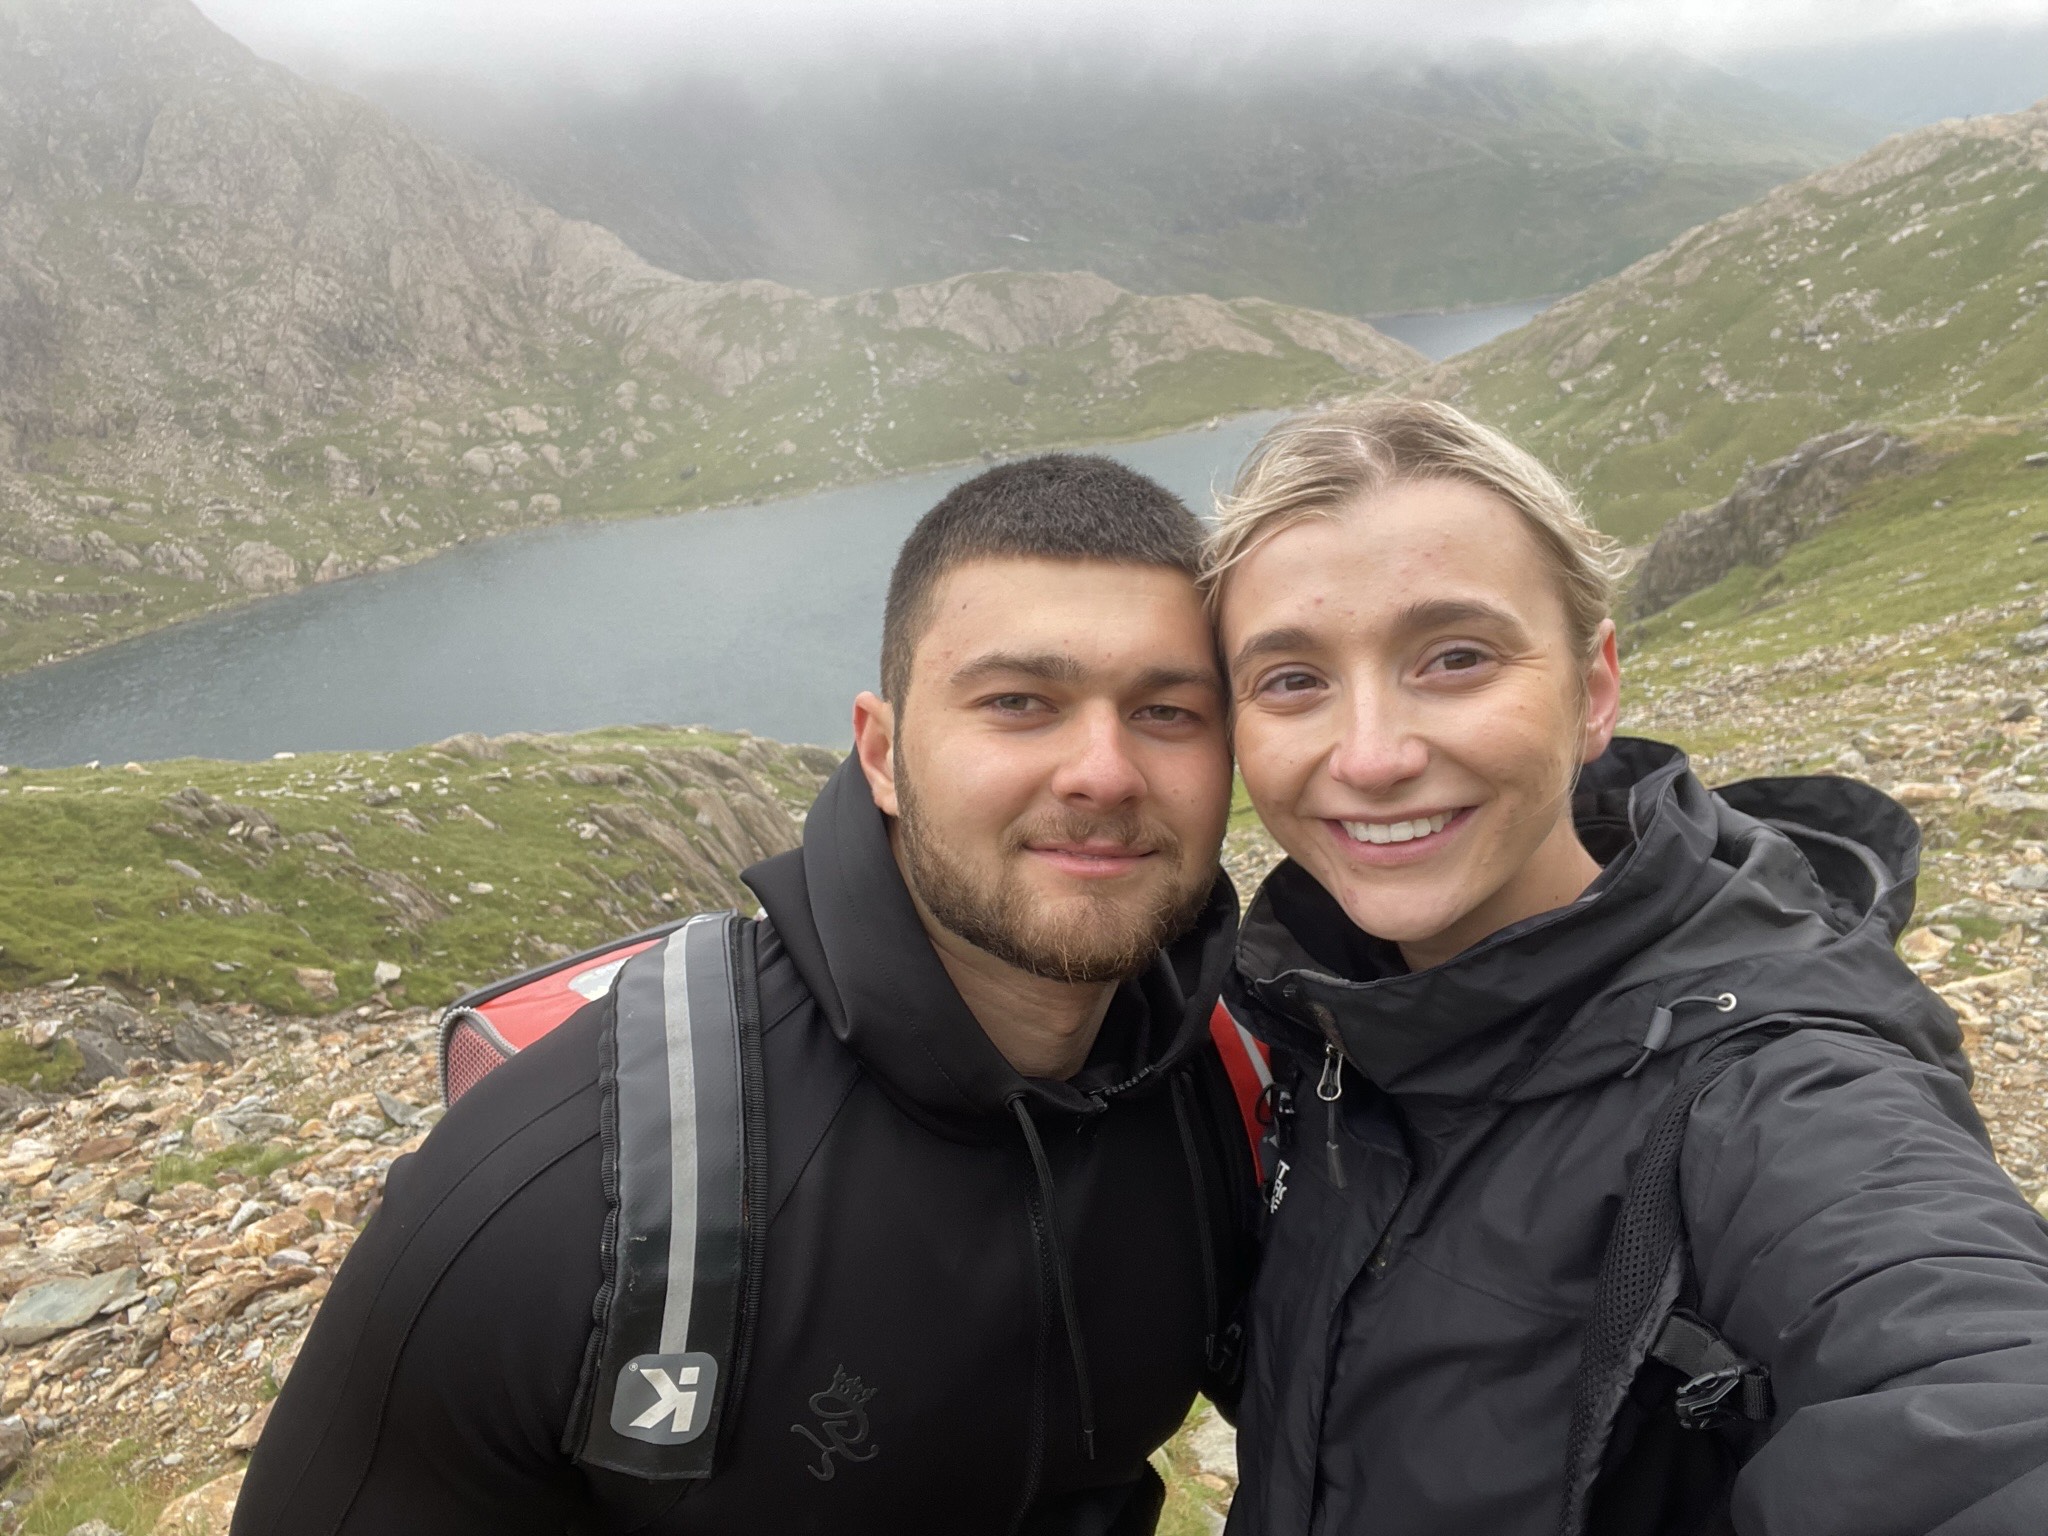 2 Kyleigh with her partner climbing Mount Snowdon to raise money to freeze some of her eggs because of Endometreosis